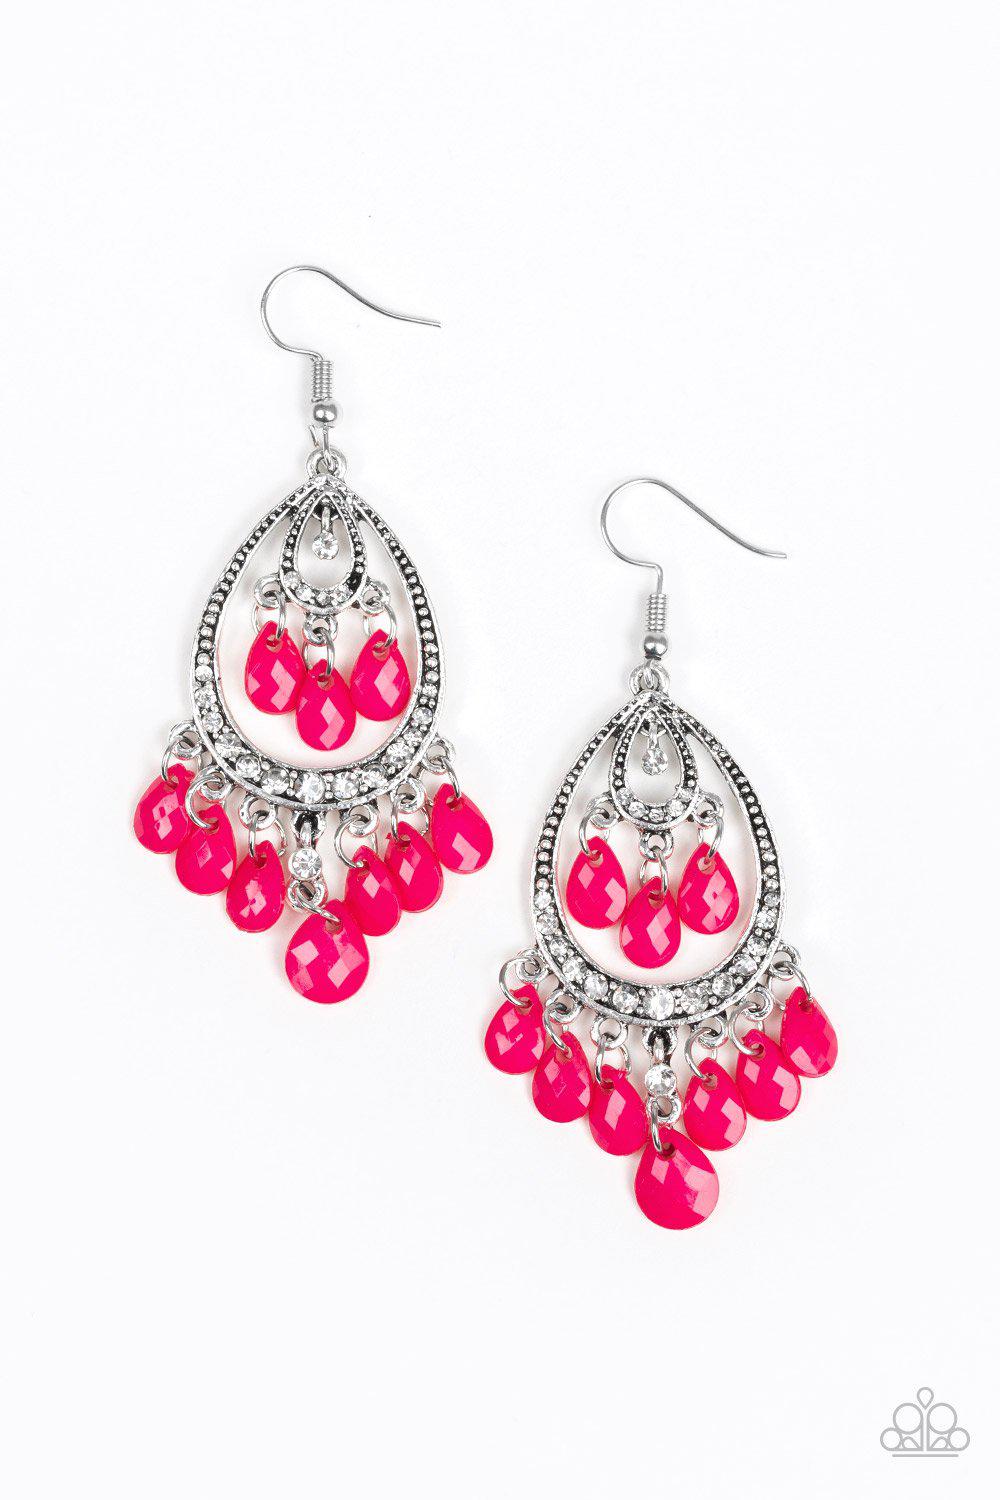 Gorgeously Genie Pink Earrings - Paparazzi Accessories - lightbox -CarasShop.com - $5 Jewelry by Cara Jewels